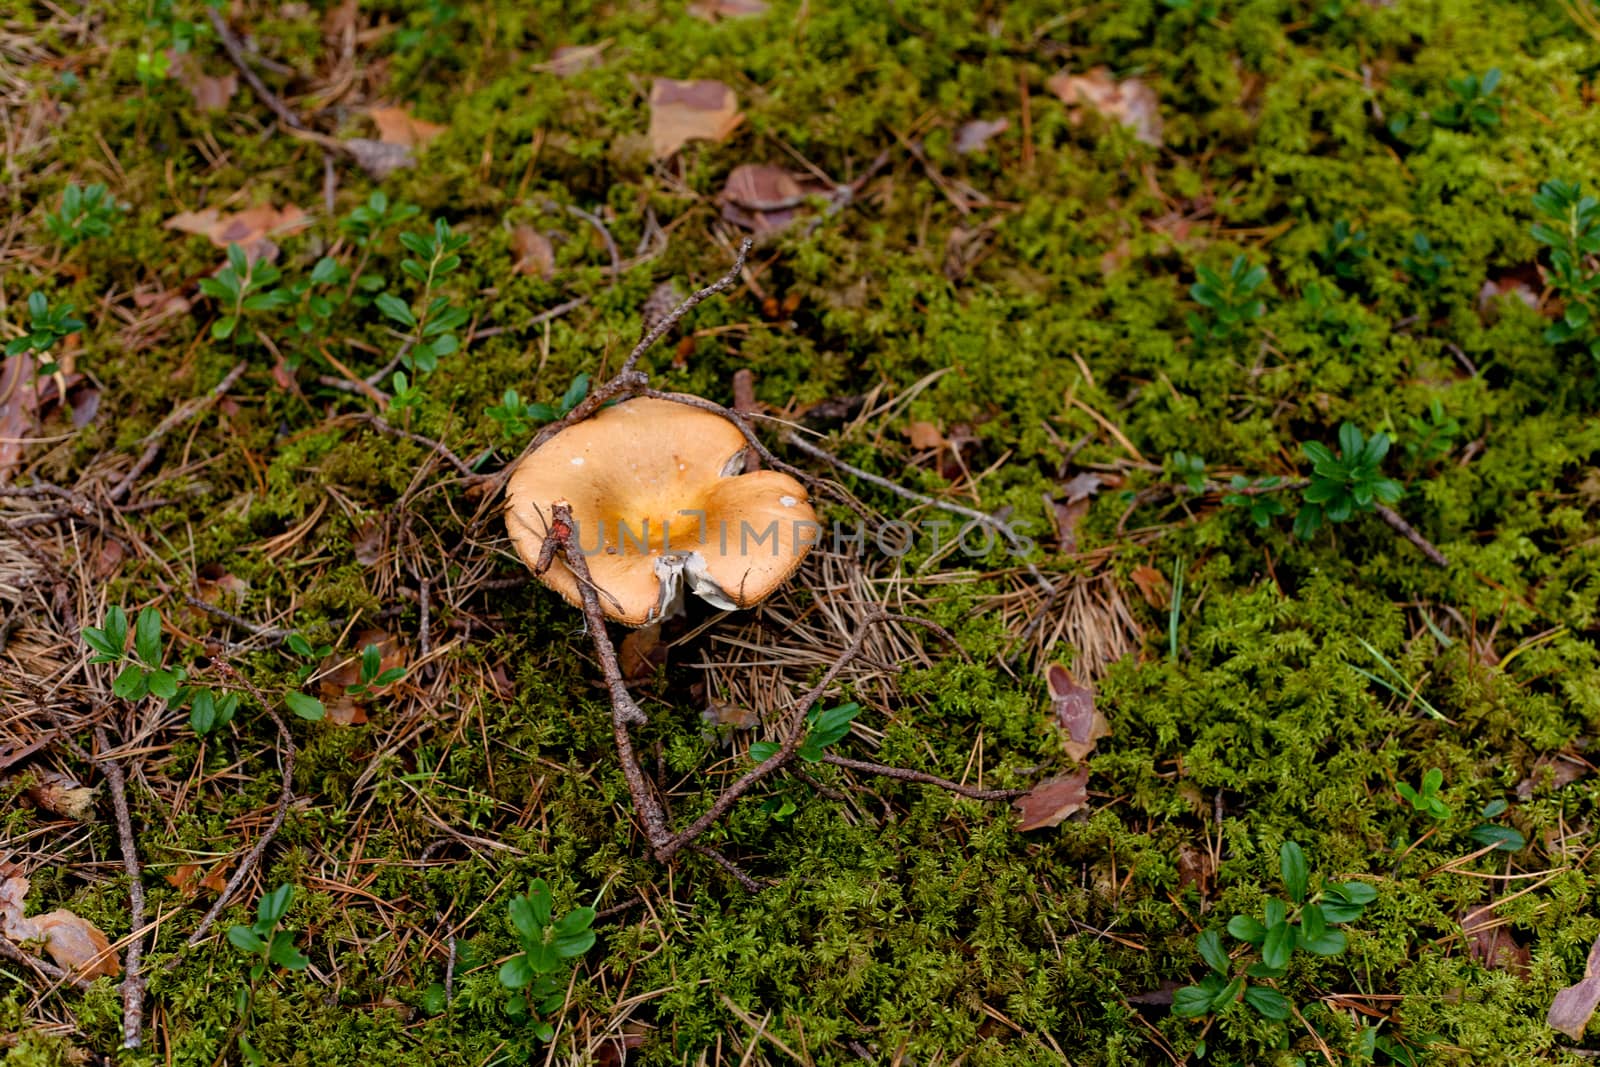 Yellow mushroom in a forest
